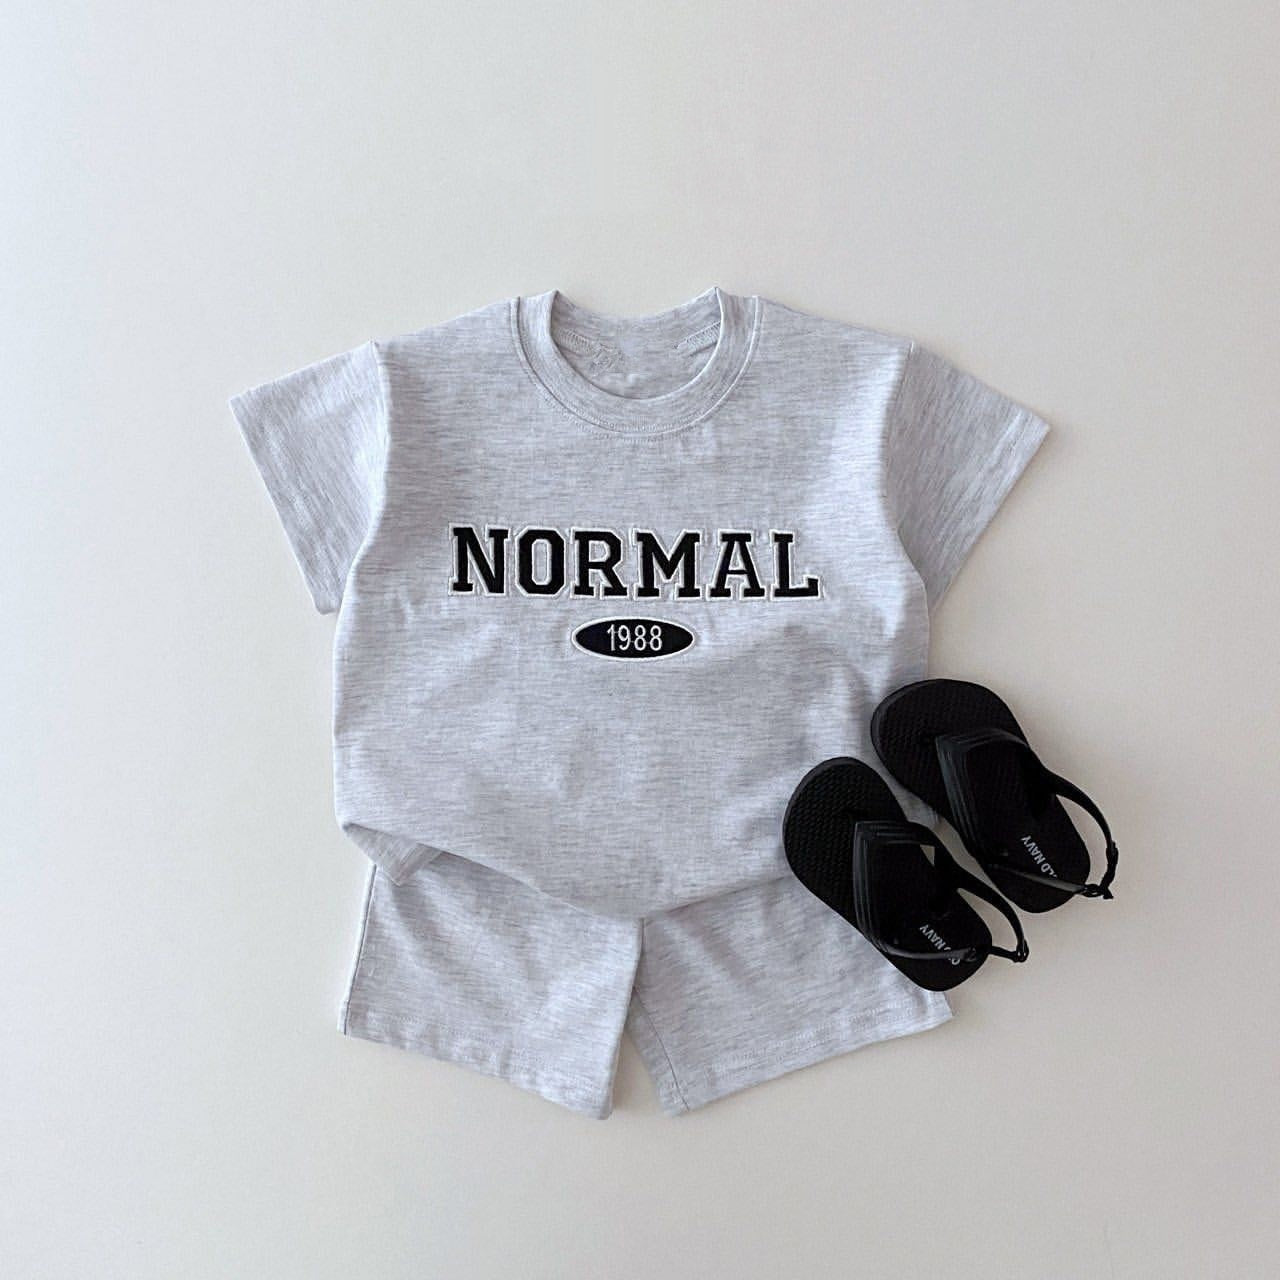 'Normal' Graphic Tee Set - Gray